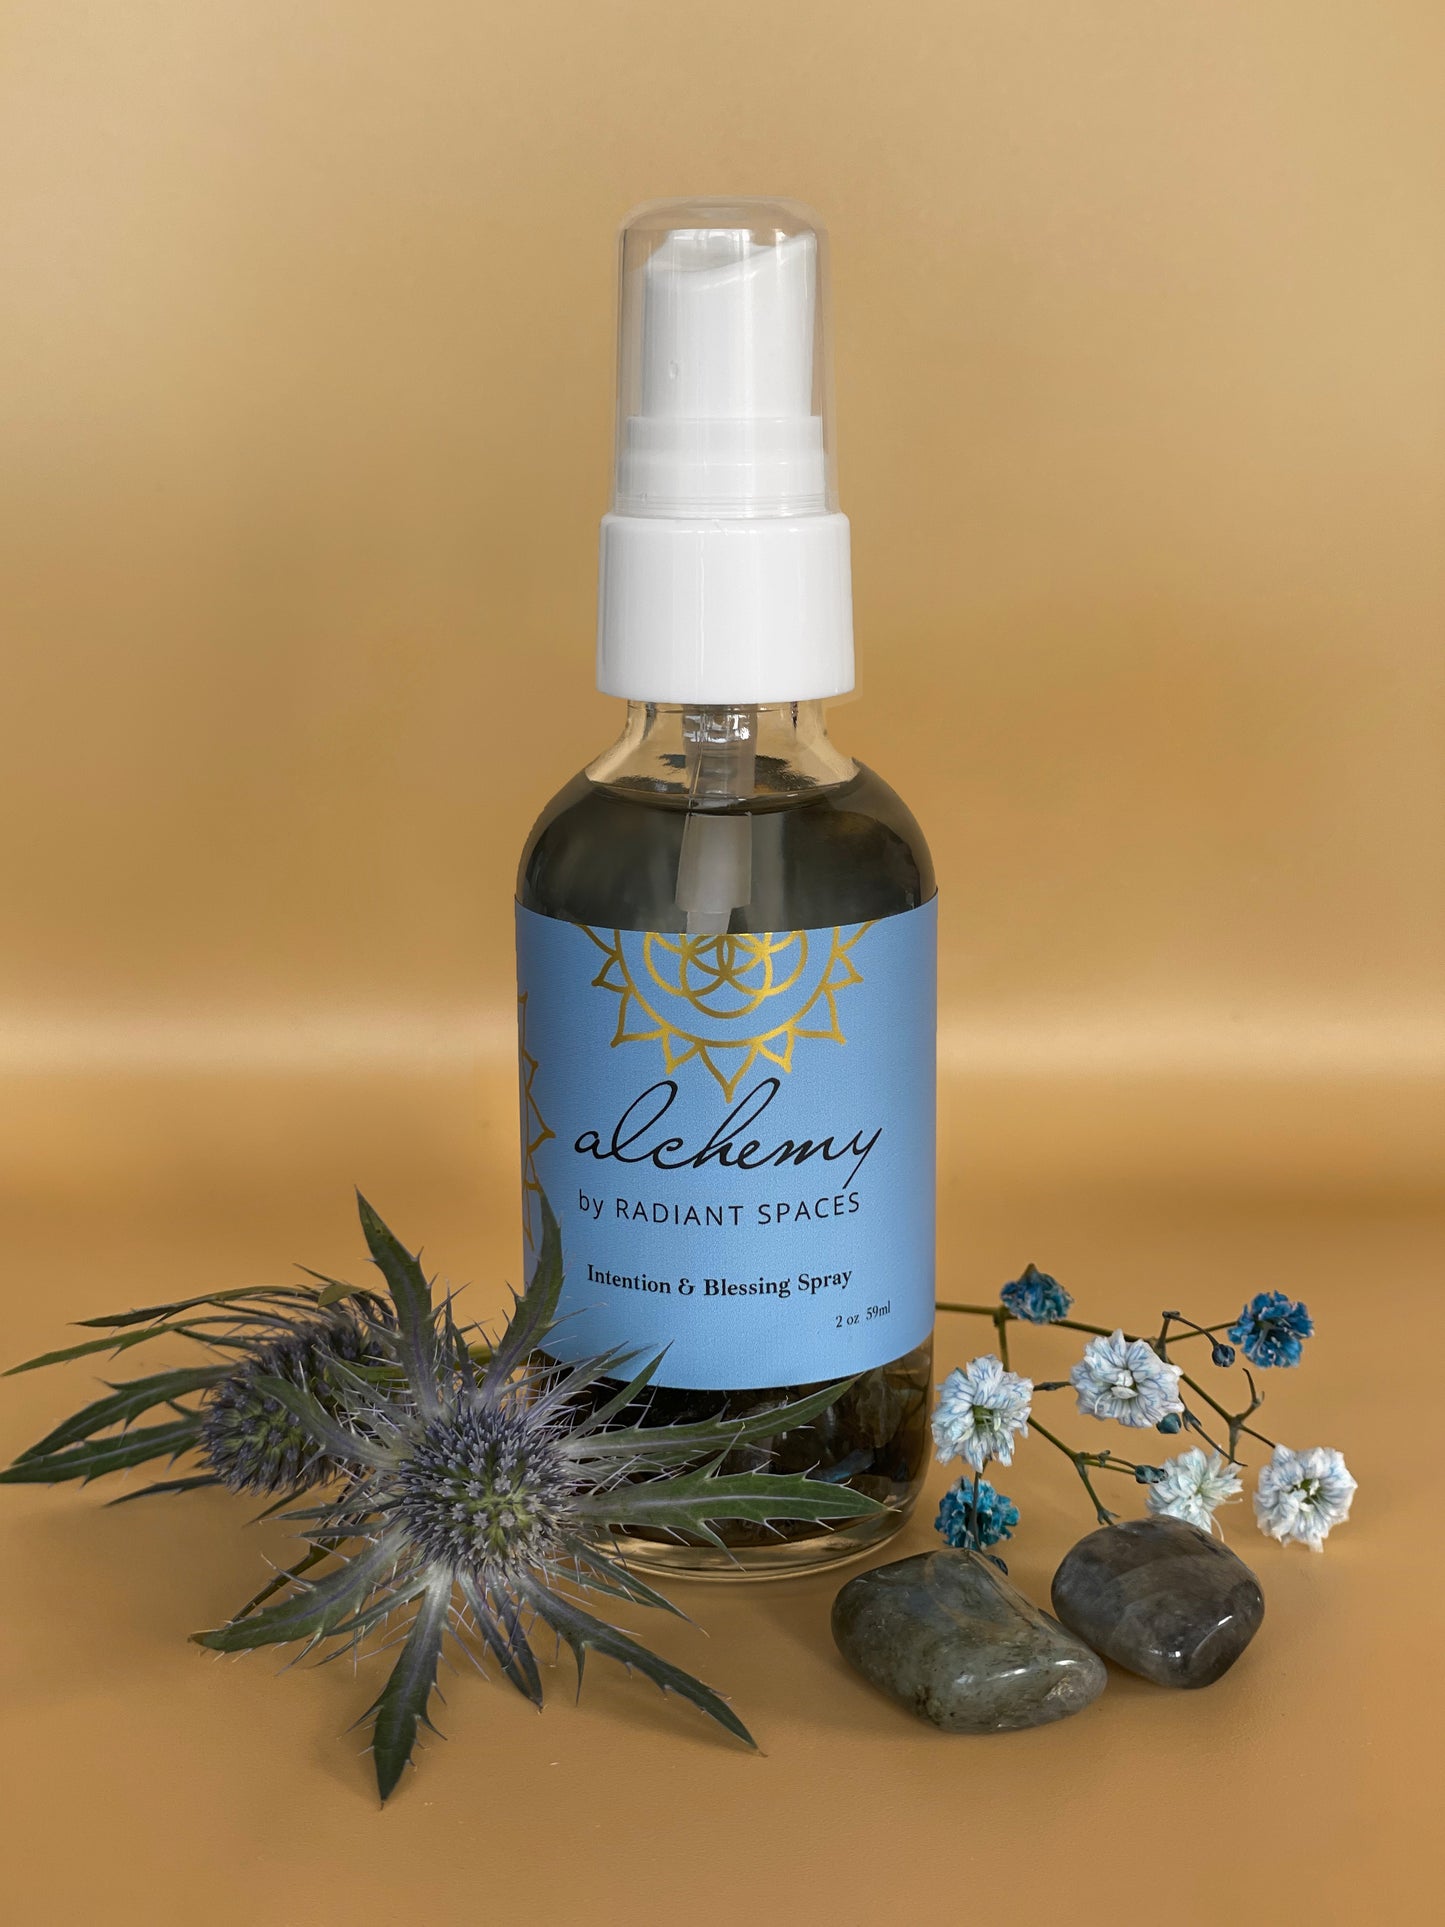 2 oz Alchemy by Radiant Spaces Intention & Blessing Spray